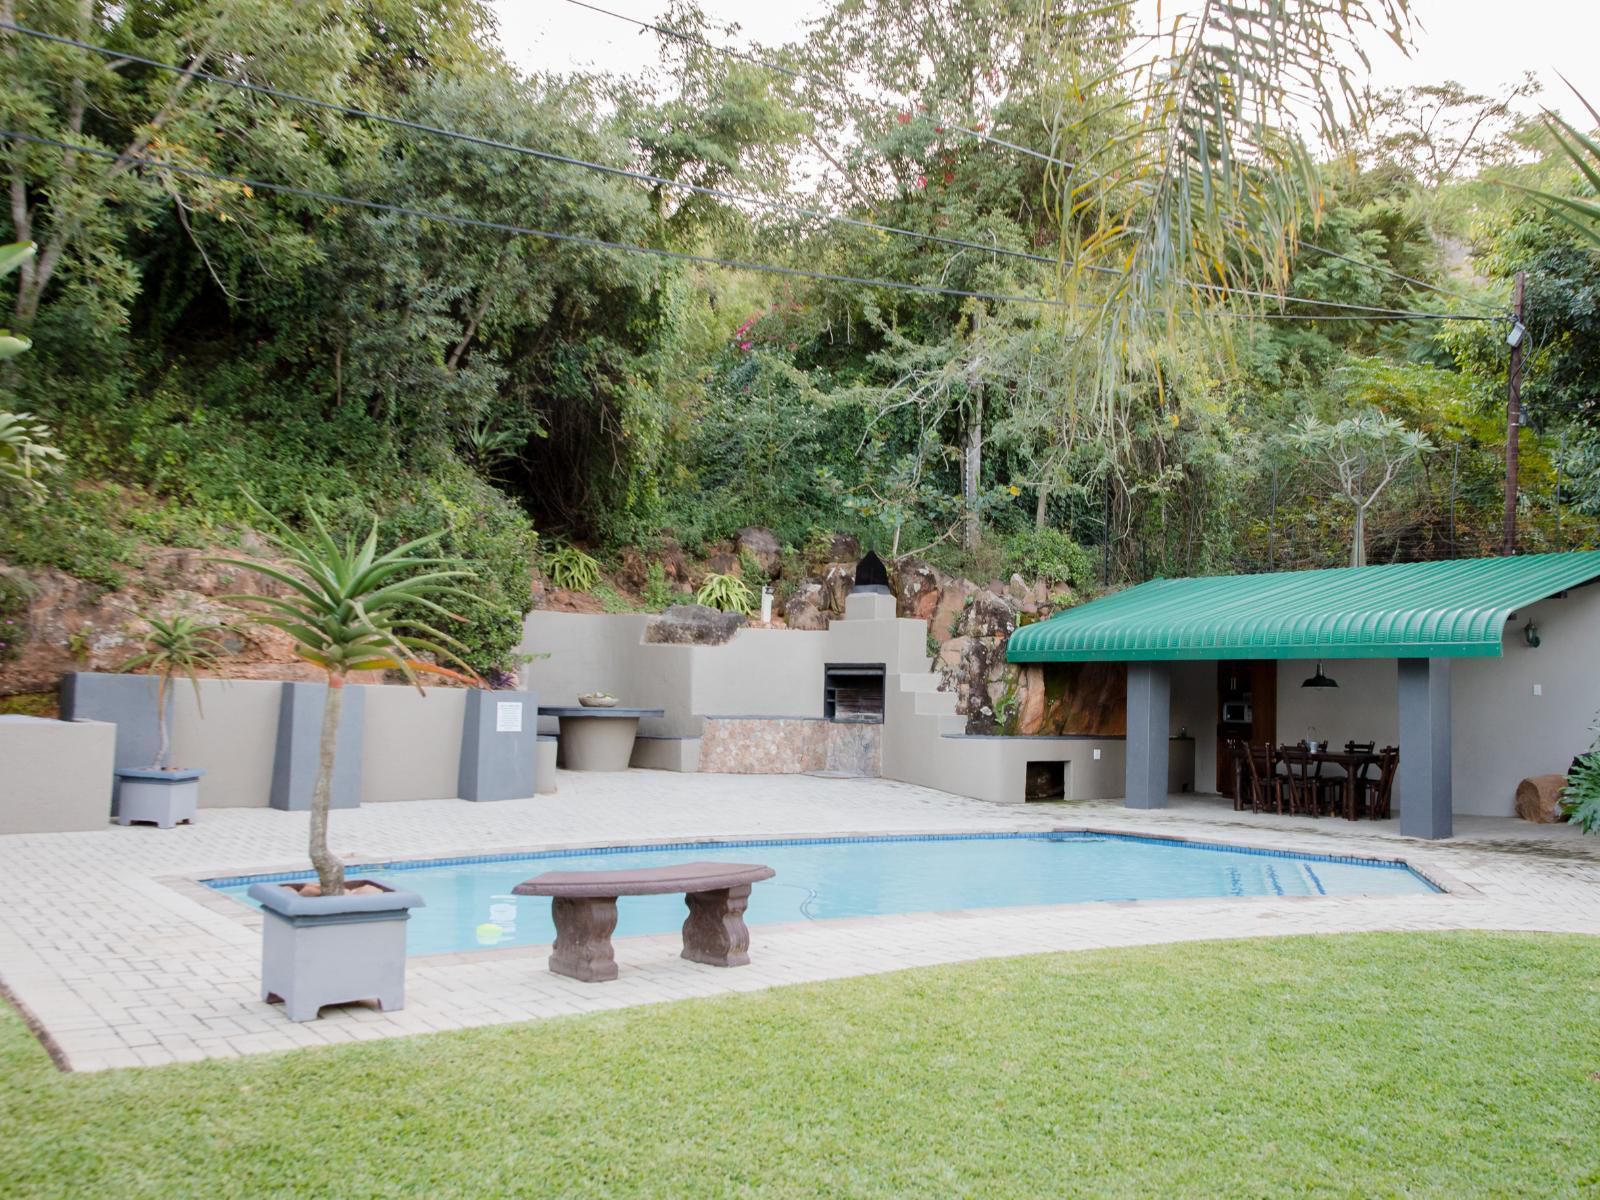 85 Ehmke Nelspruit Mpumalanga South Africa House, Building, Architecture, Palm Tree, Plant, Nature, Wood, Garden, Swimming Pool